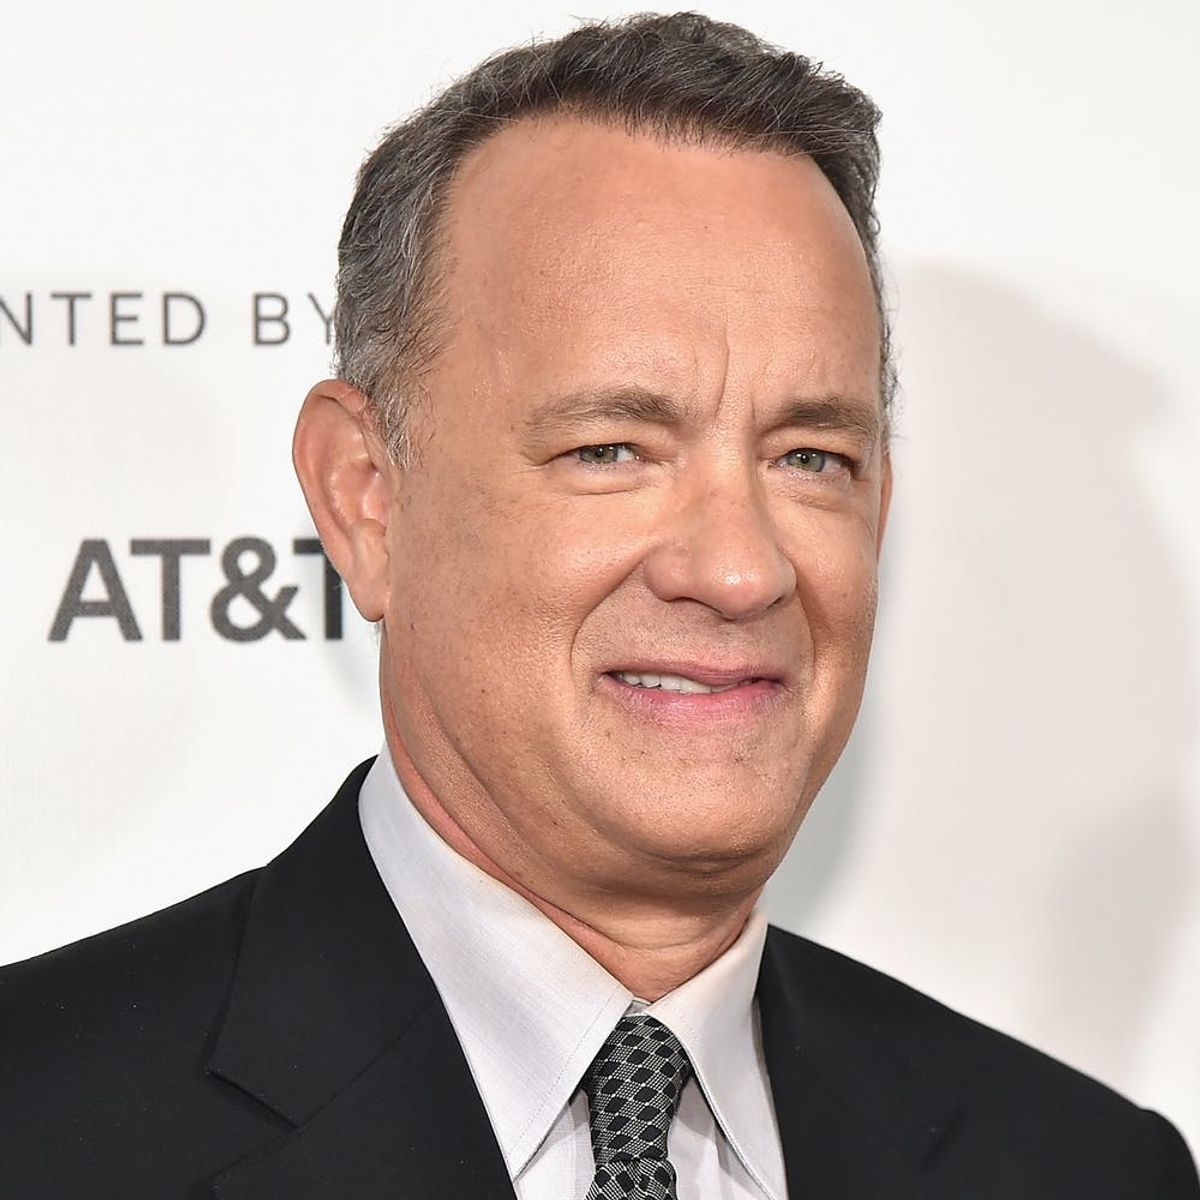 Tom Hanks Playing Mister Rogers Could Save the World, According to Twitter